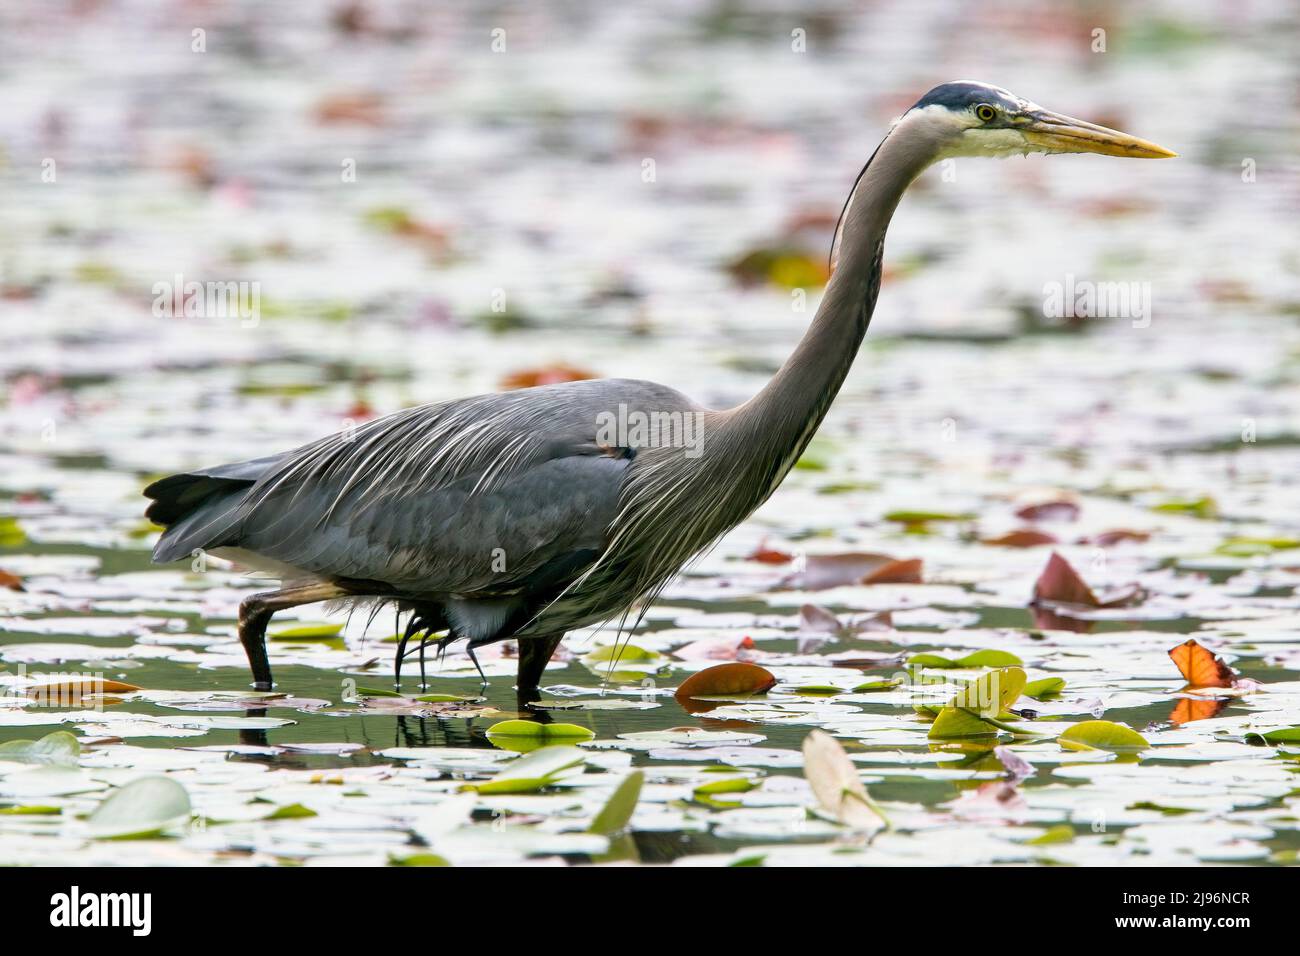 Great Blue Heron, (Ardea herodias), an adult wading in a pond, Vancouver, British Colombia, Canada. Stock Photo